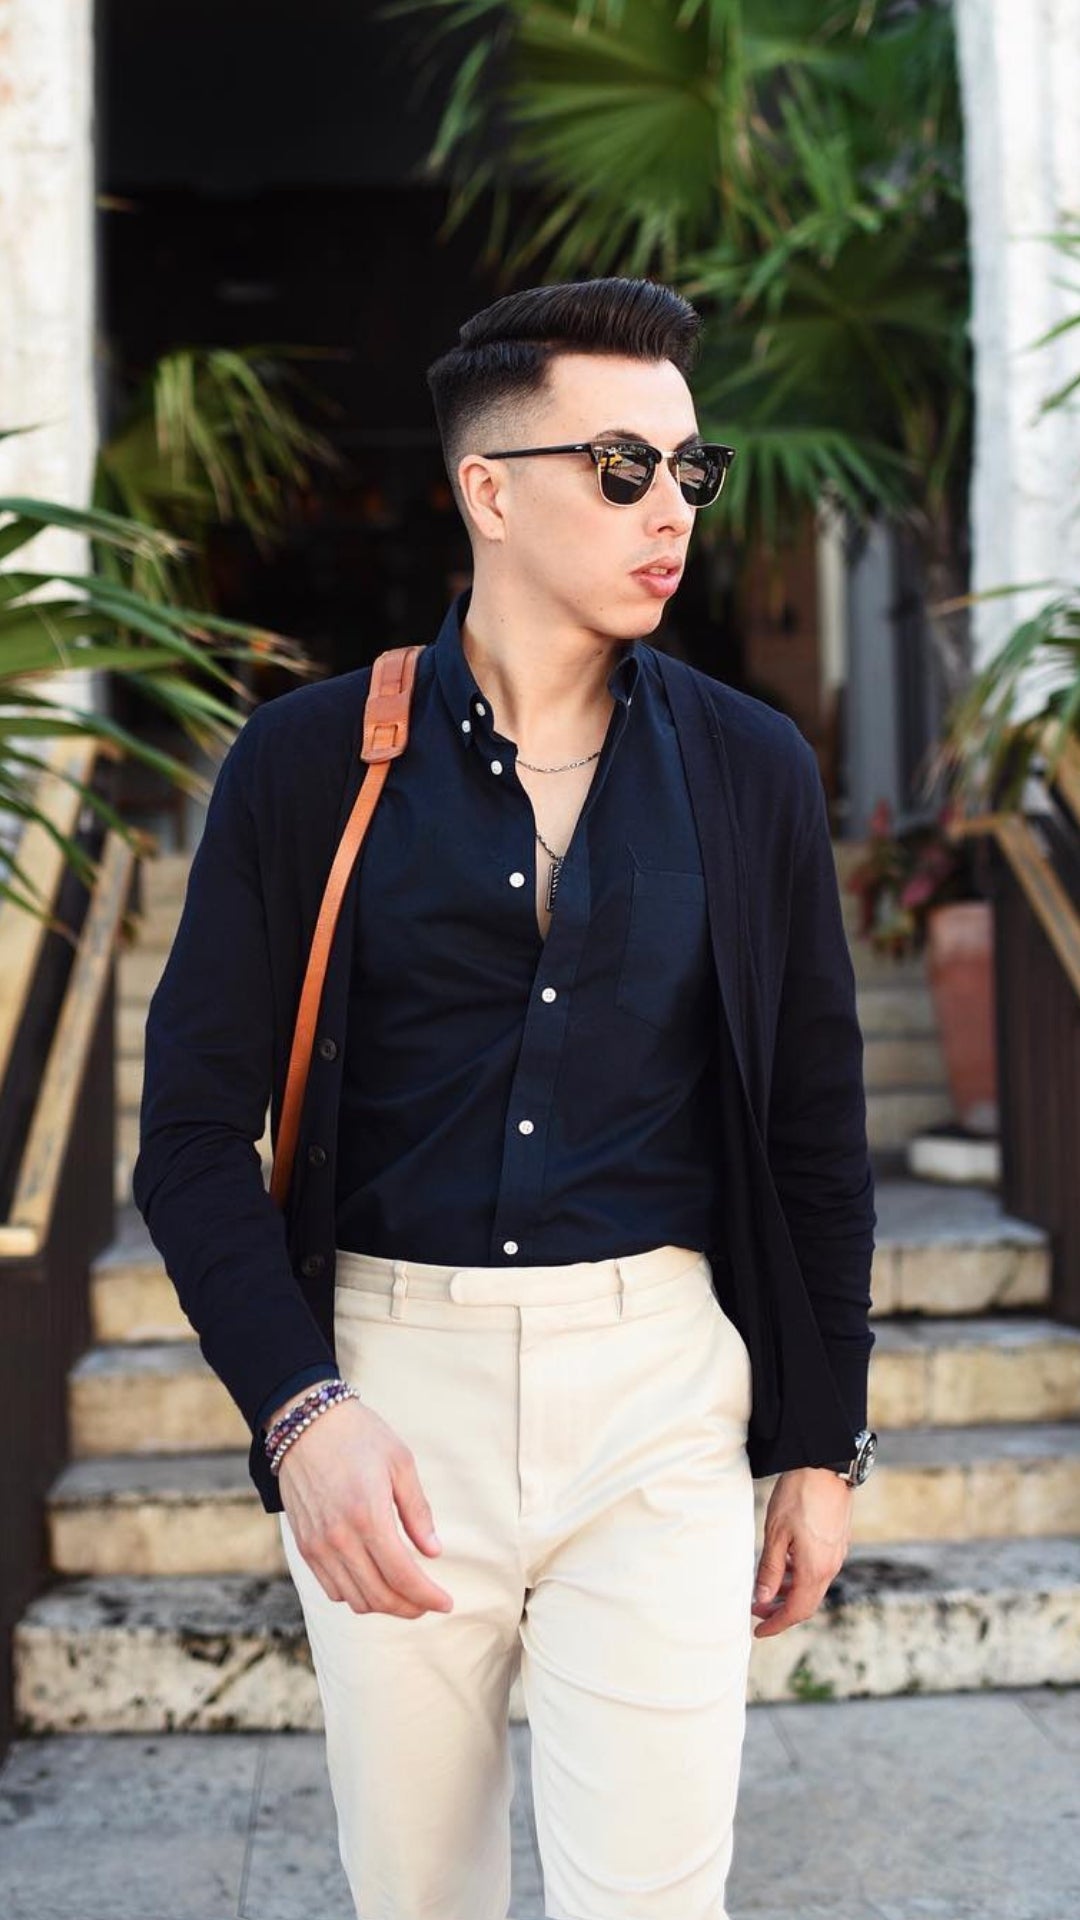 Simple outfits for men. #simple #outfits #mensfashion #streetstyle